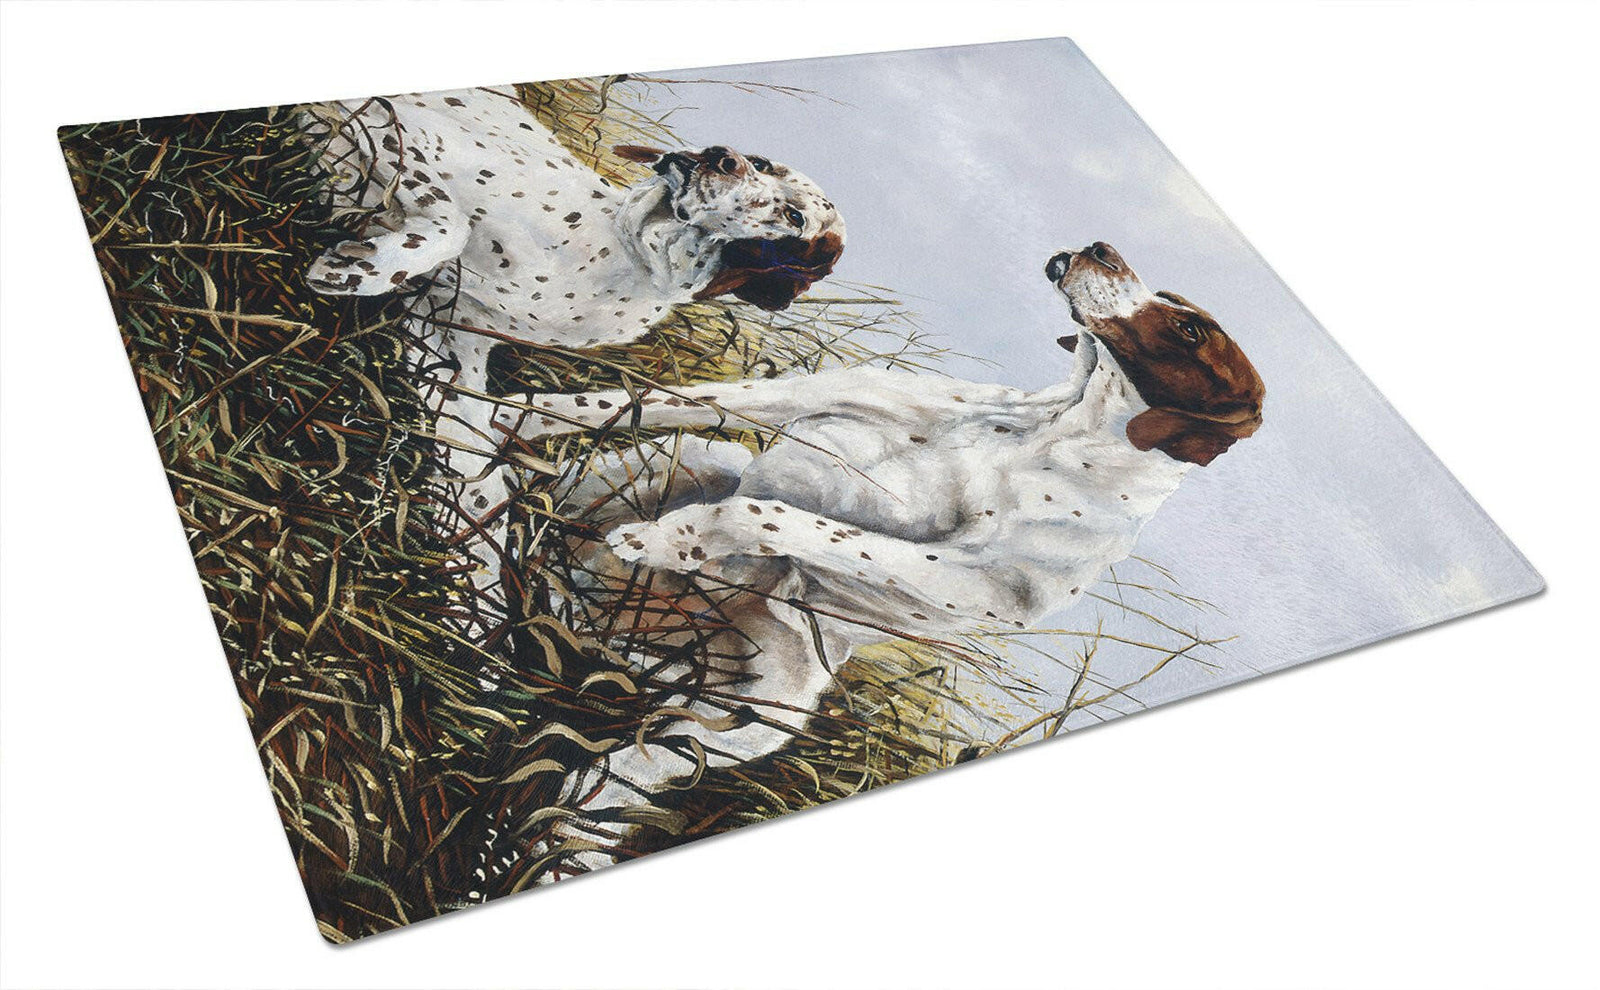 English Pointer by Michael Herring Glass Cutting Board Large HMHE0011LCB by Caroline's Treasures